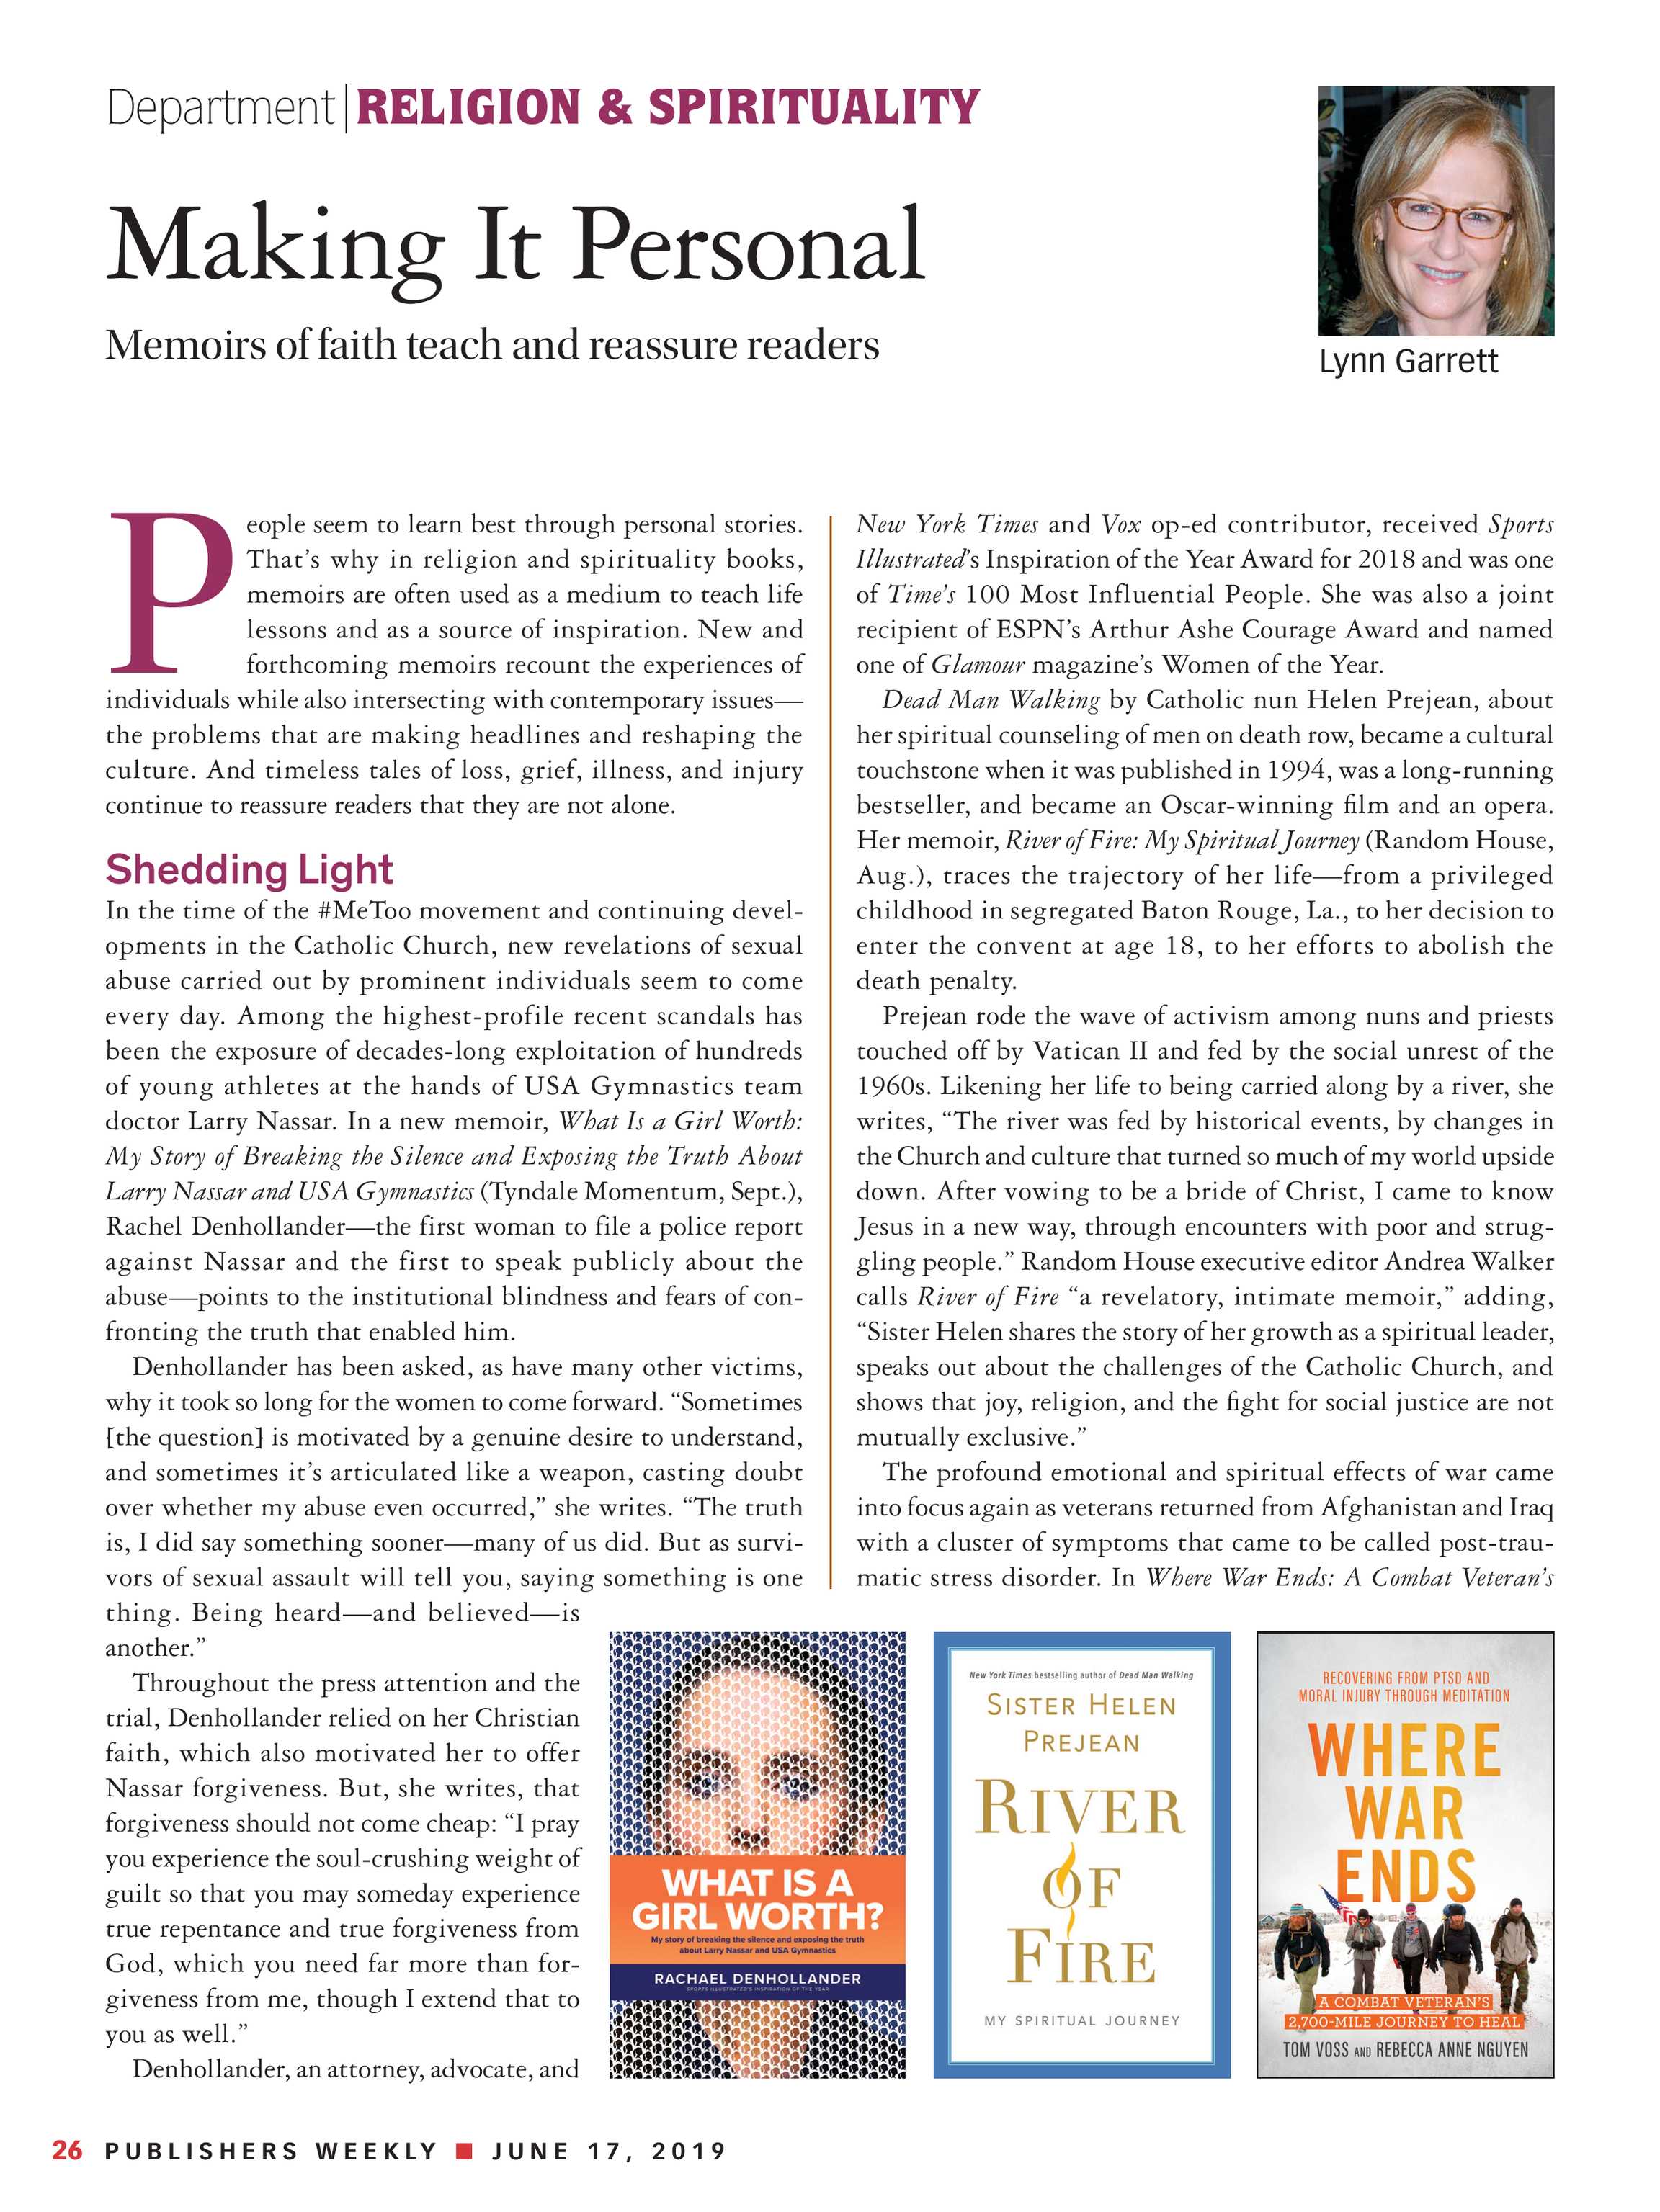 Publishers Weekly June 17 2019 Page 20